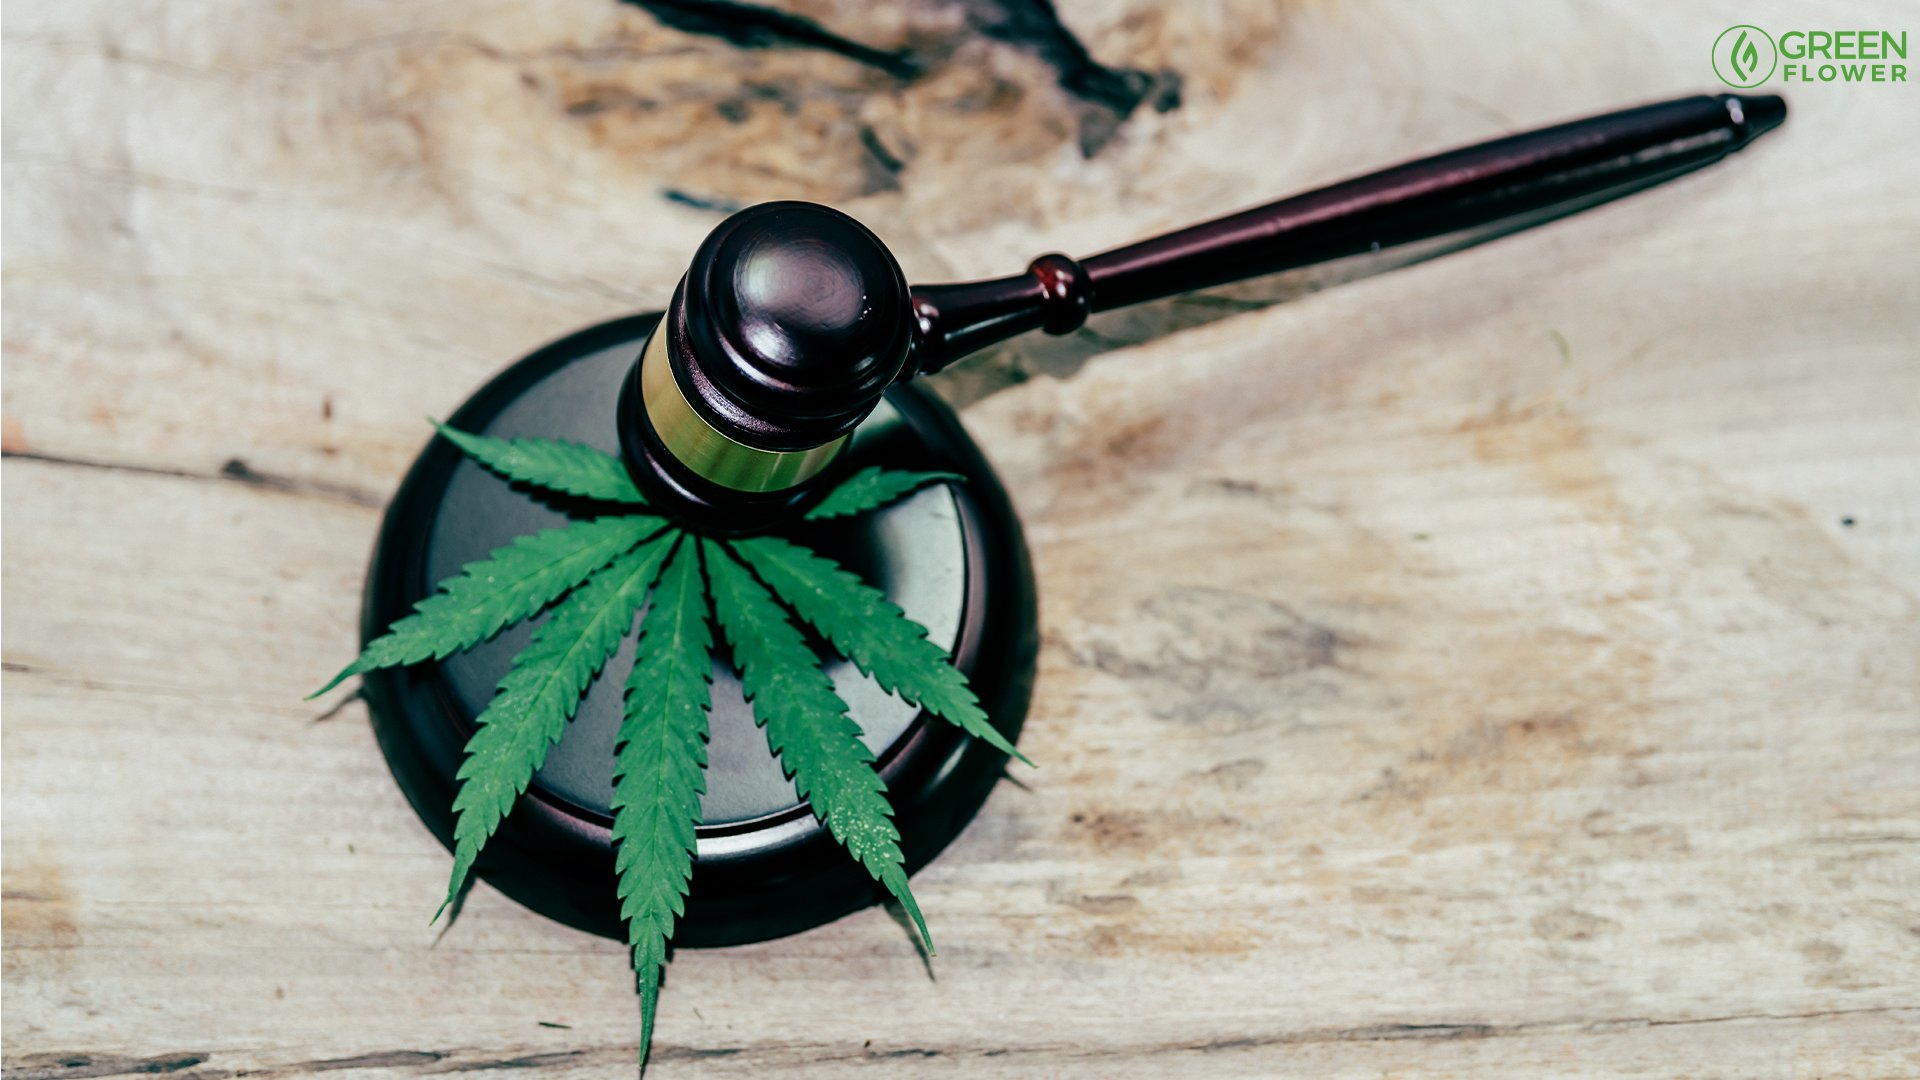 Pa. Supreme Court Lifts Medical Cannabis Ban For Parolees 0